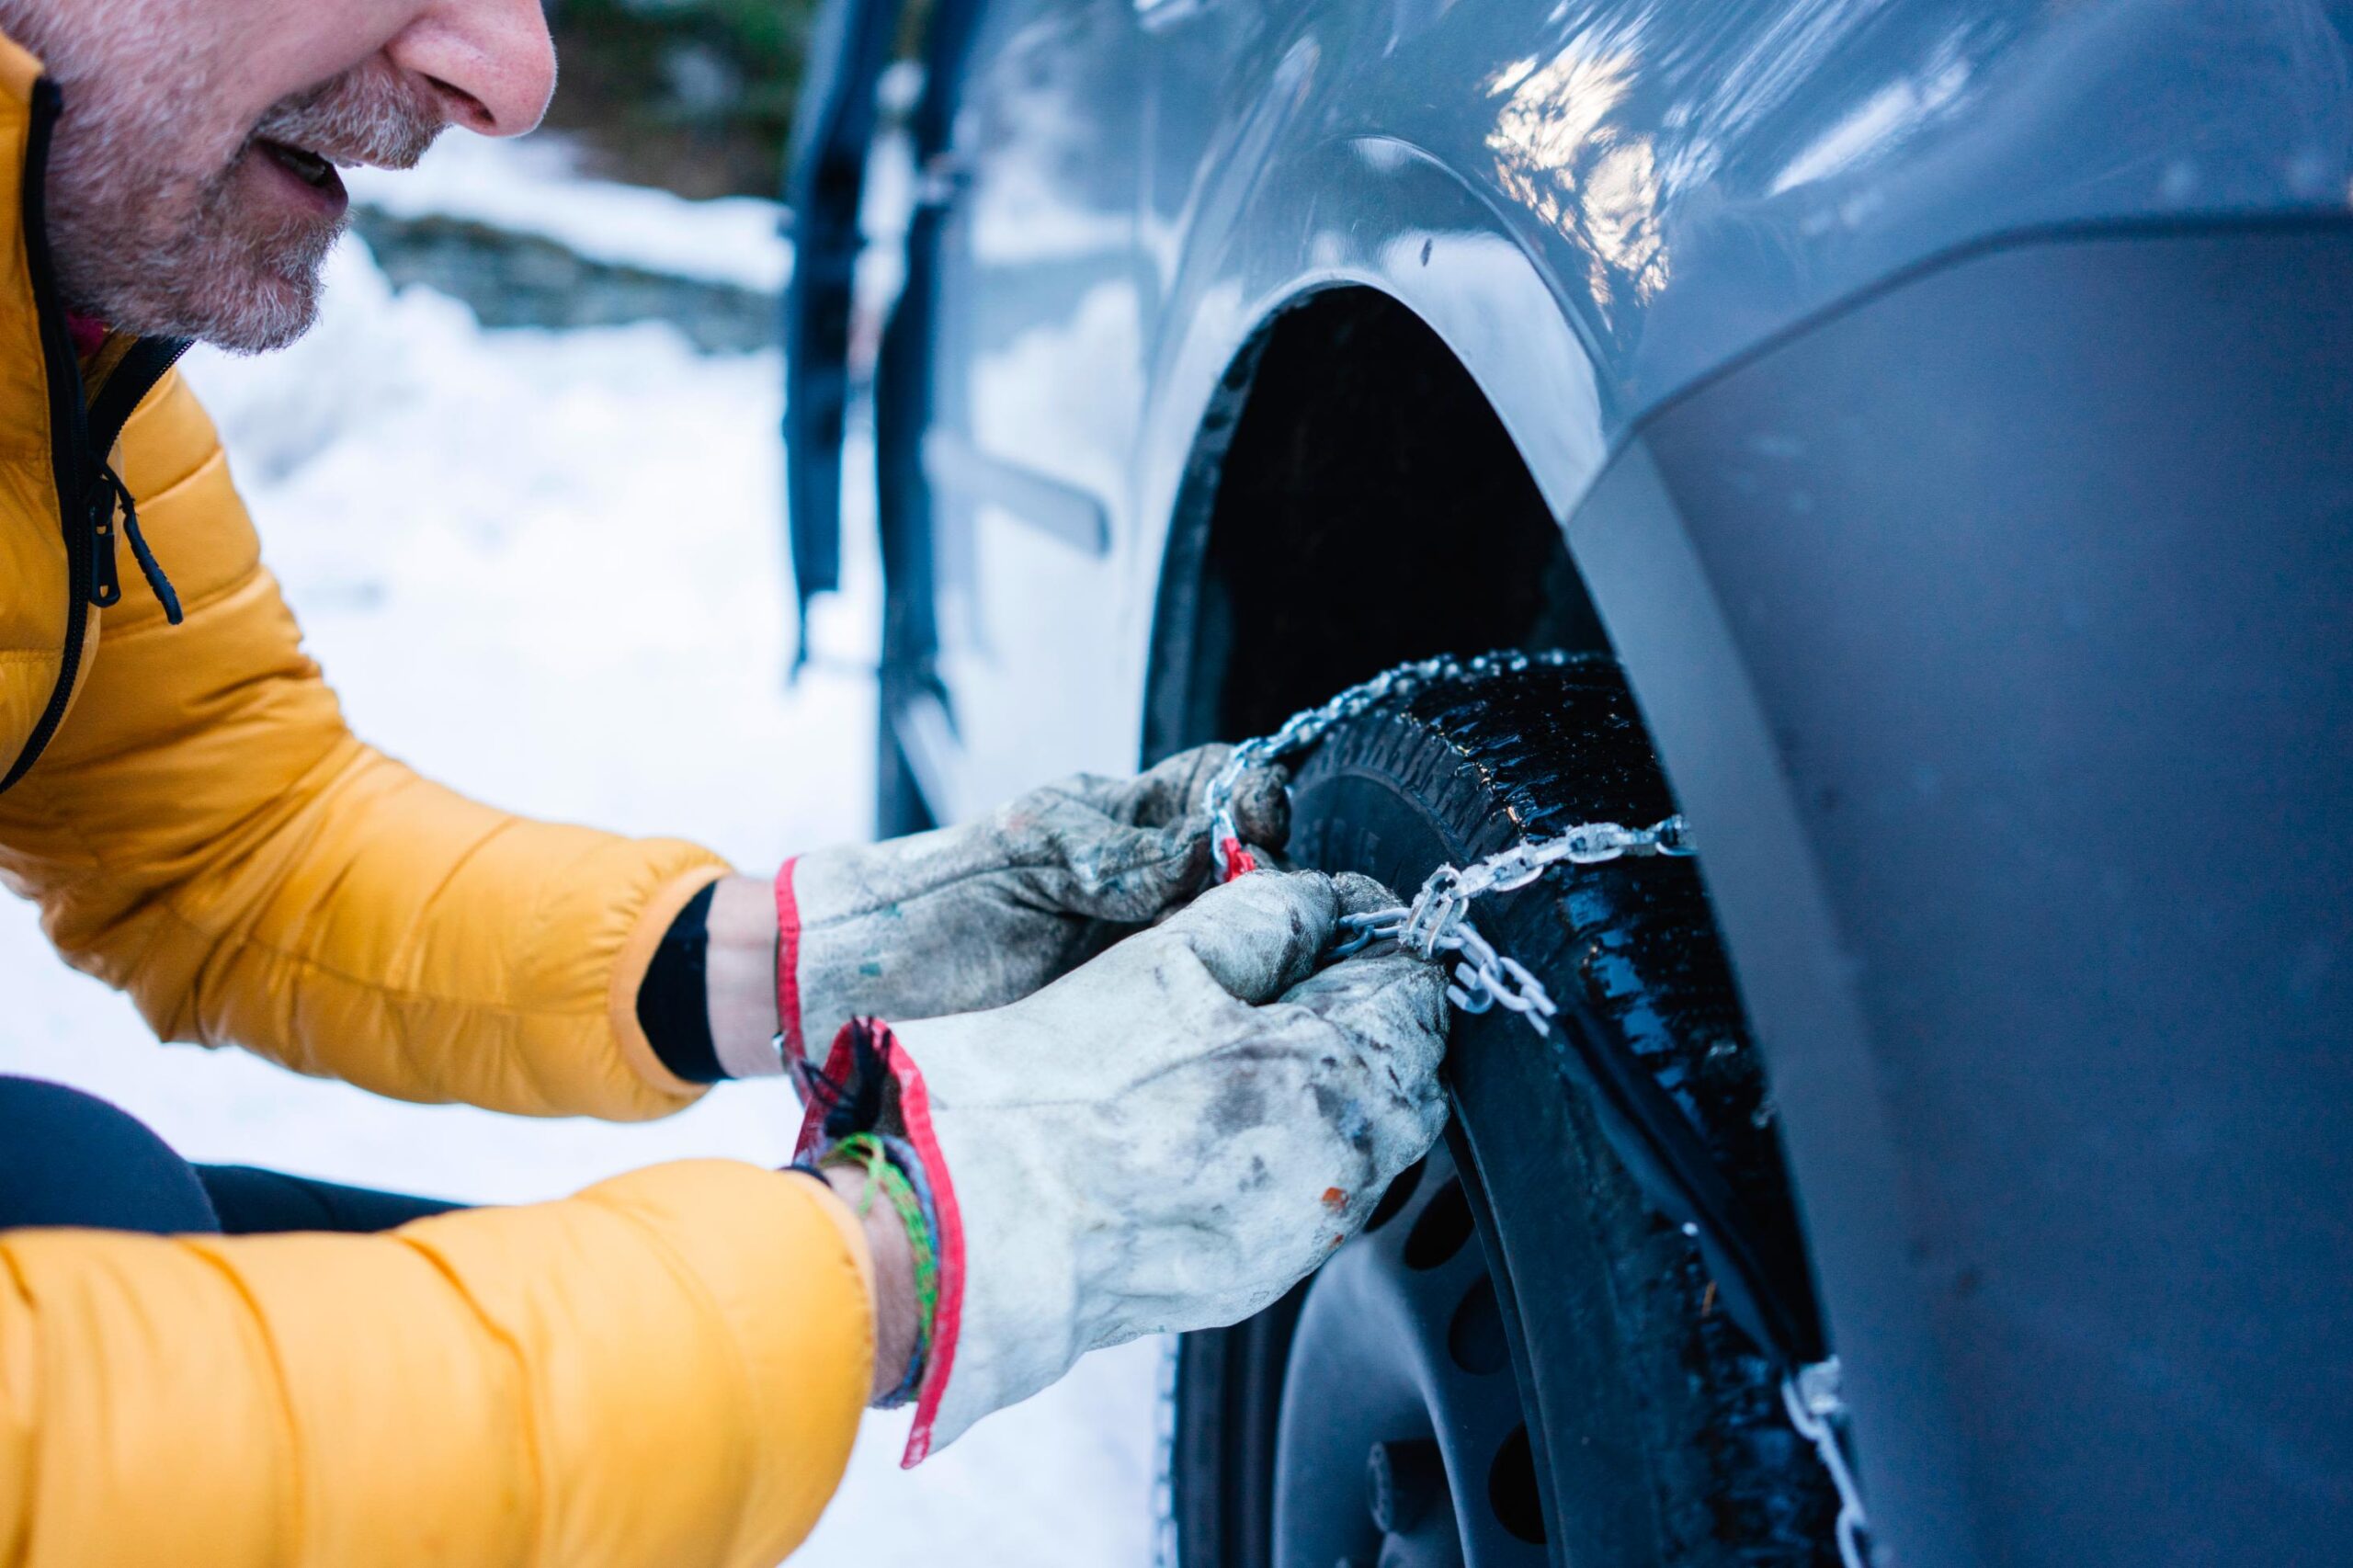 A person puts snow chains on a tire while parked in snowy conditions.
(Westend61, Getty Images)...